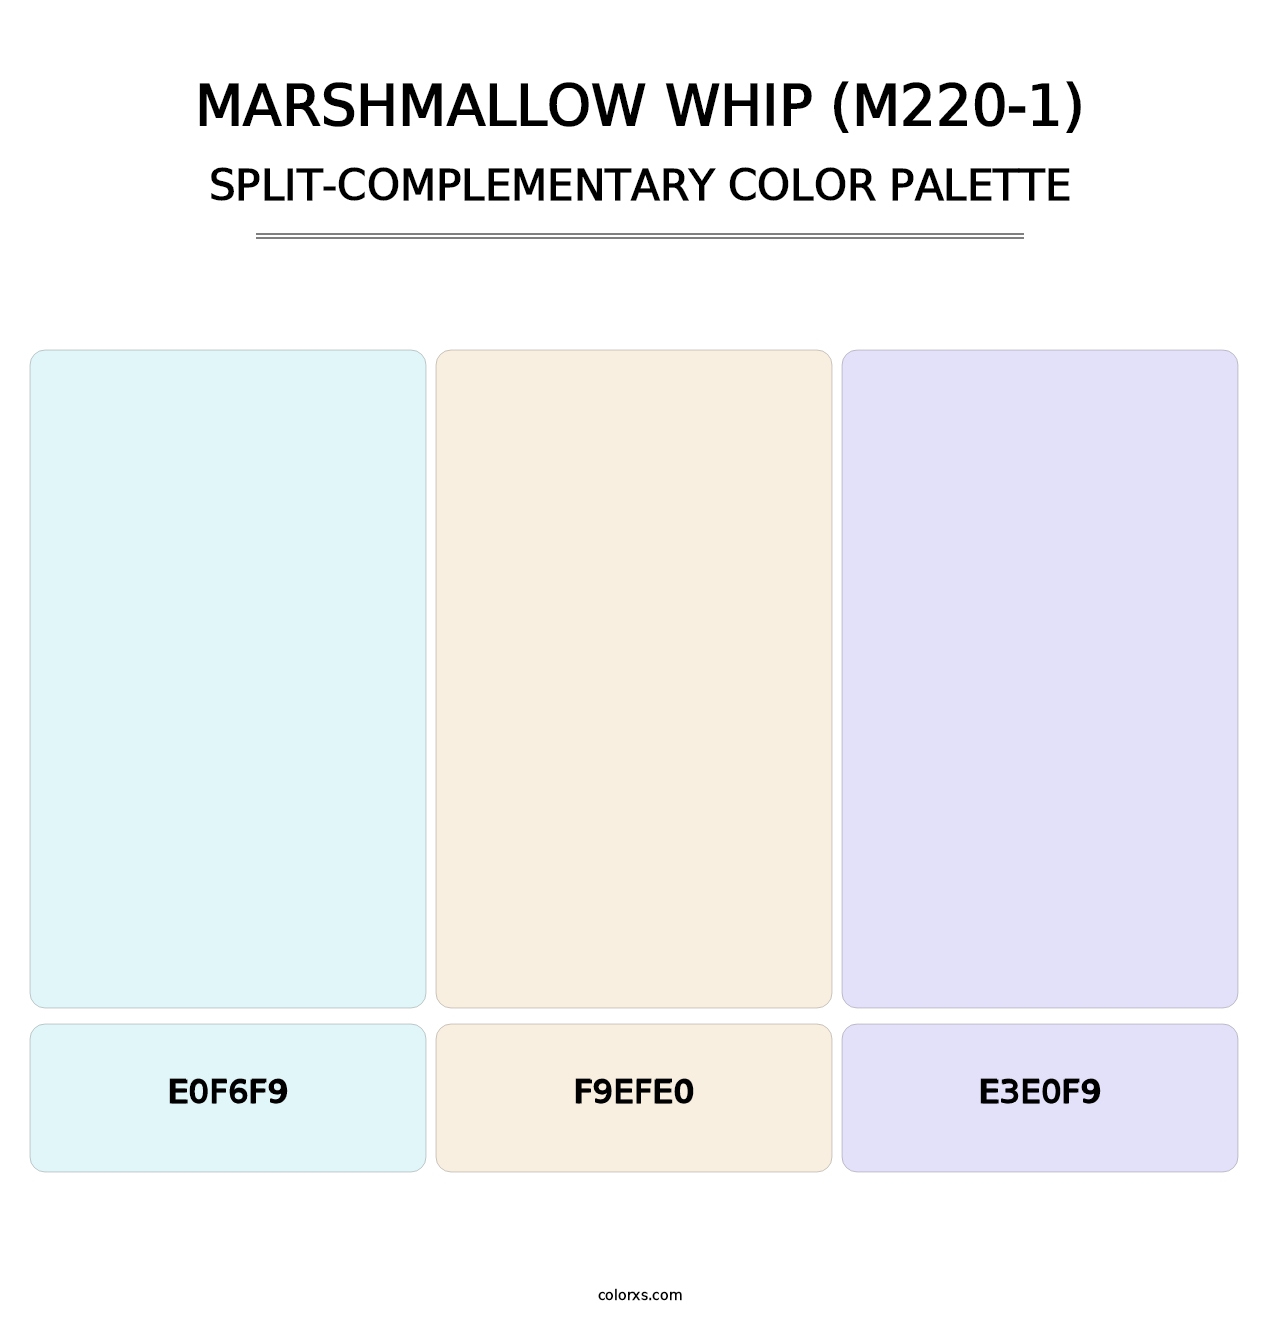 Marshmallow Whip (M220-1) - Split-Complementary Color Palette